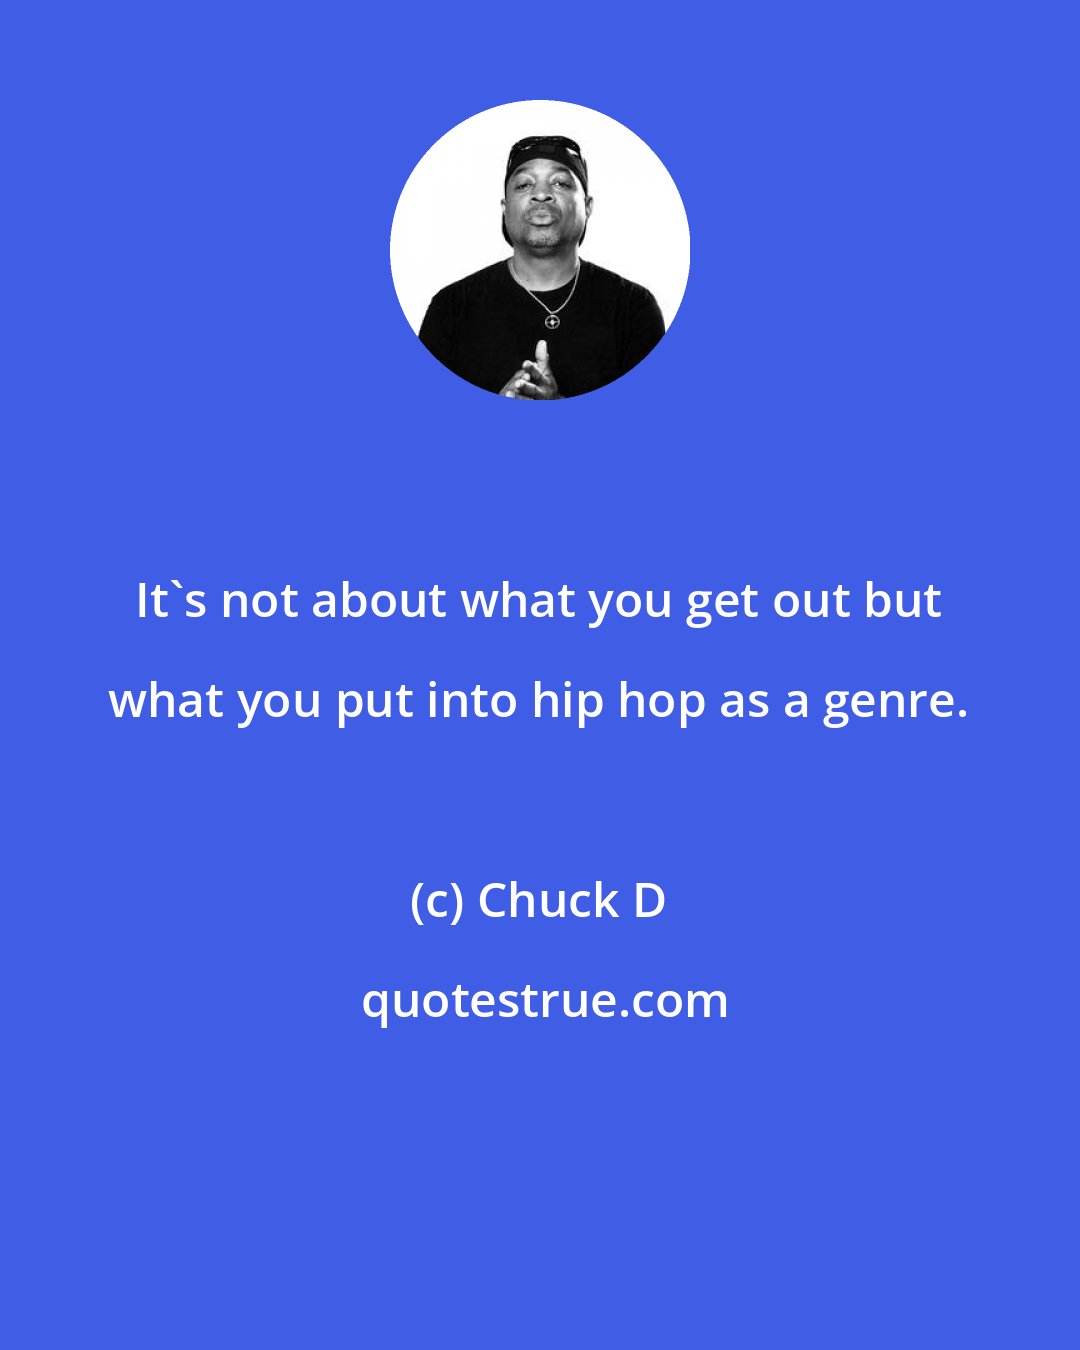 Chuck D: It's not about what you get out but what you put into hip hop as a genre.